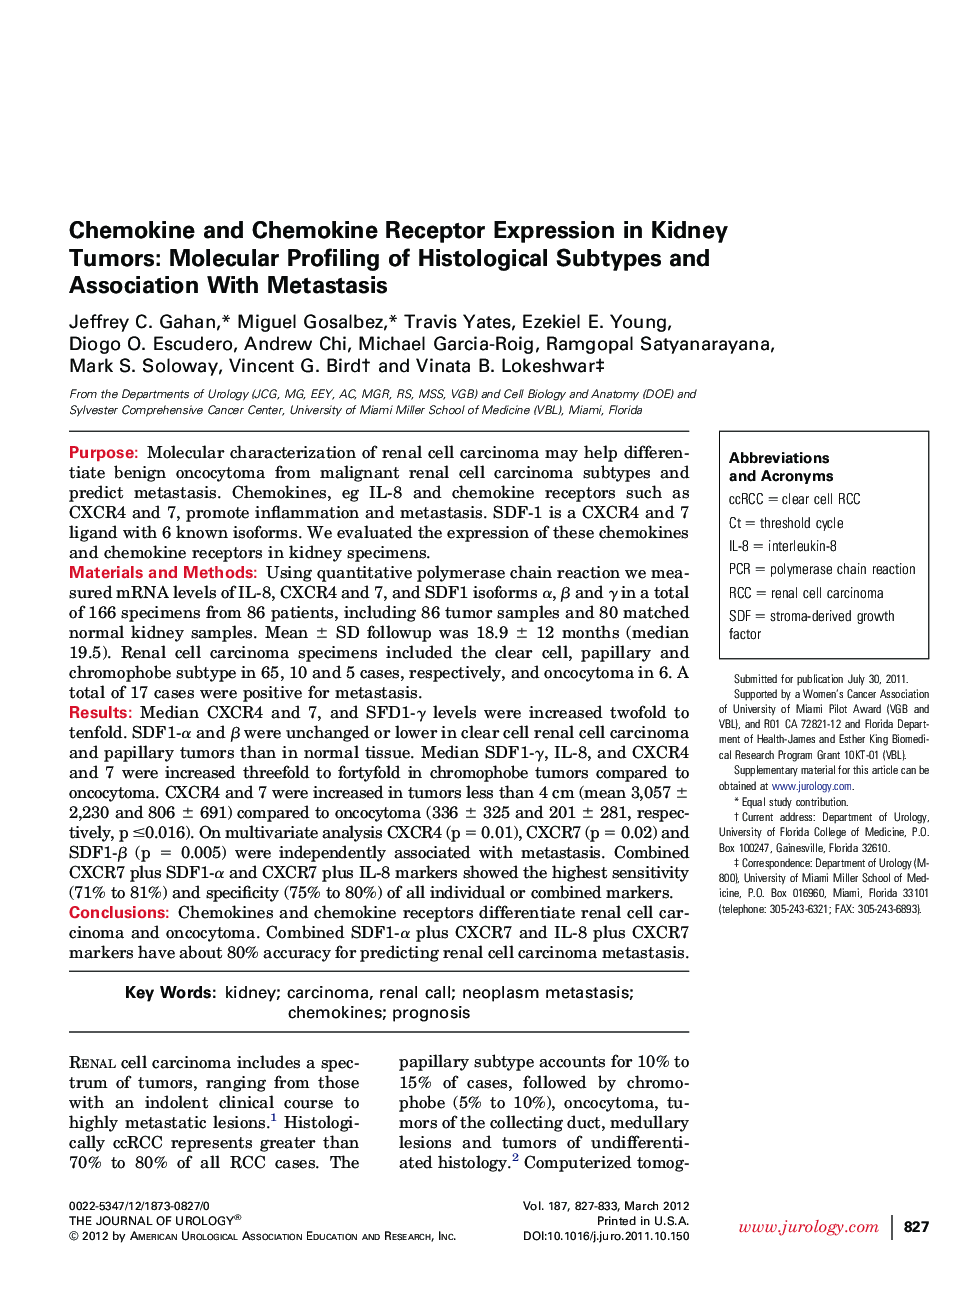 Chemokine and Chemokine Receptor Expression in Kidney Tumors: Molecular Profiling of Histological Subtypes and Association With Metastasis 